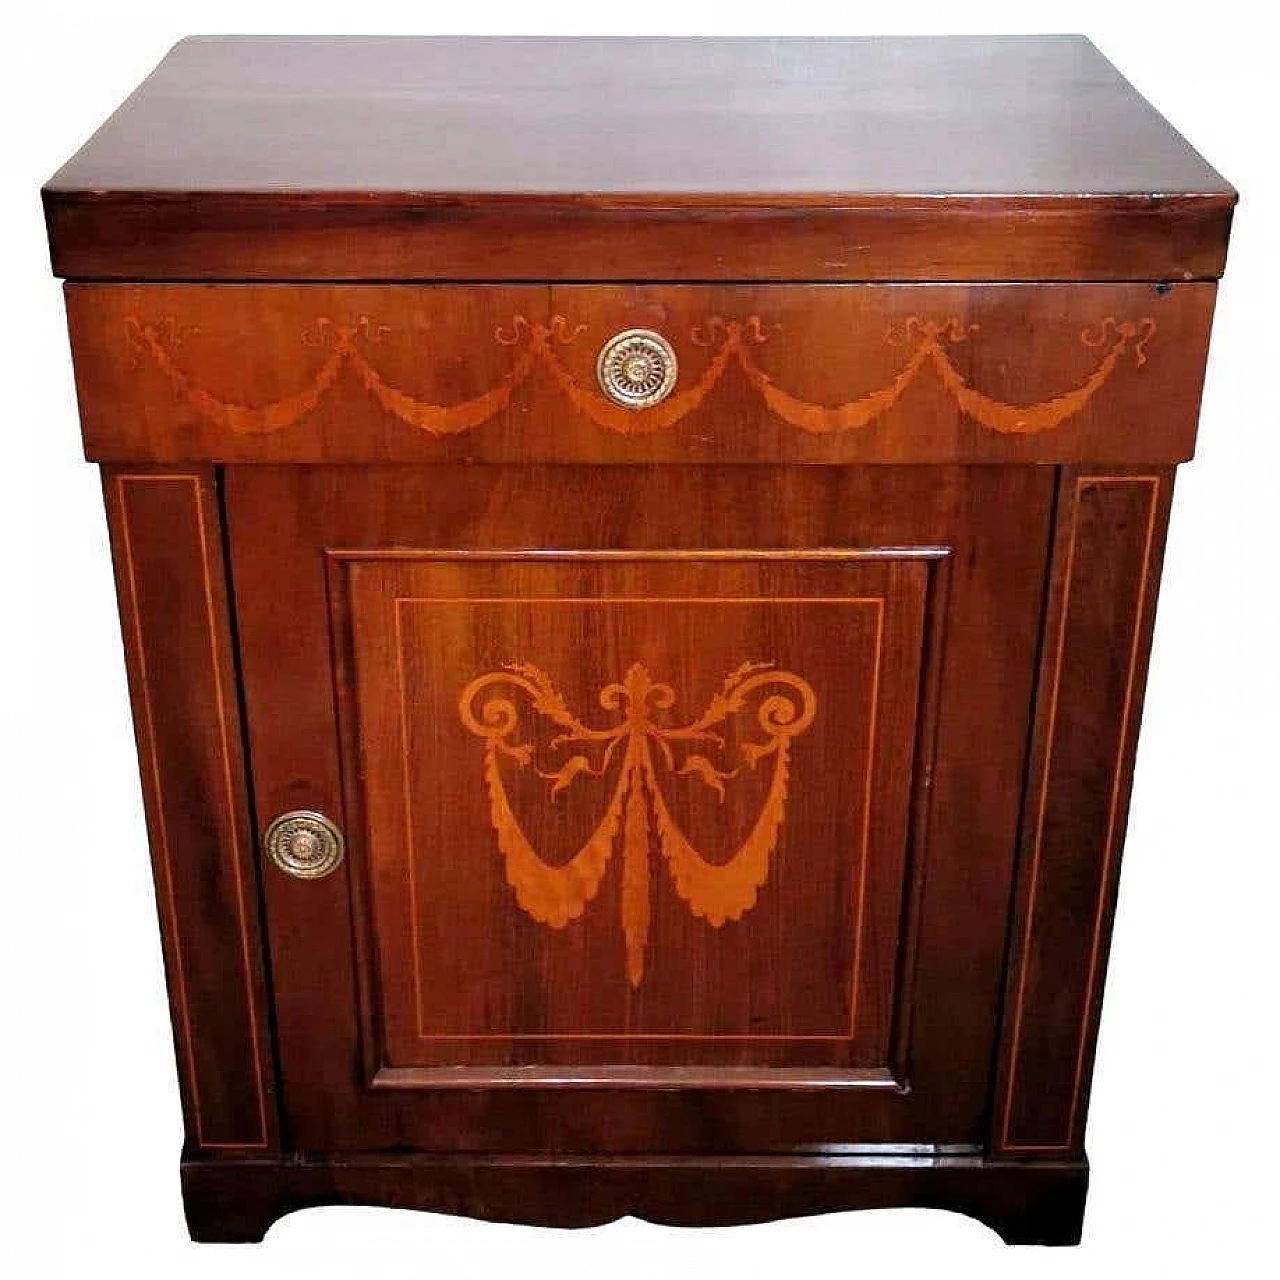 Biedermeier-style sideboard in sapele wood with birch inlay, late 19th century 17